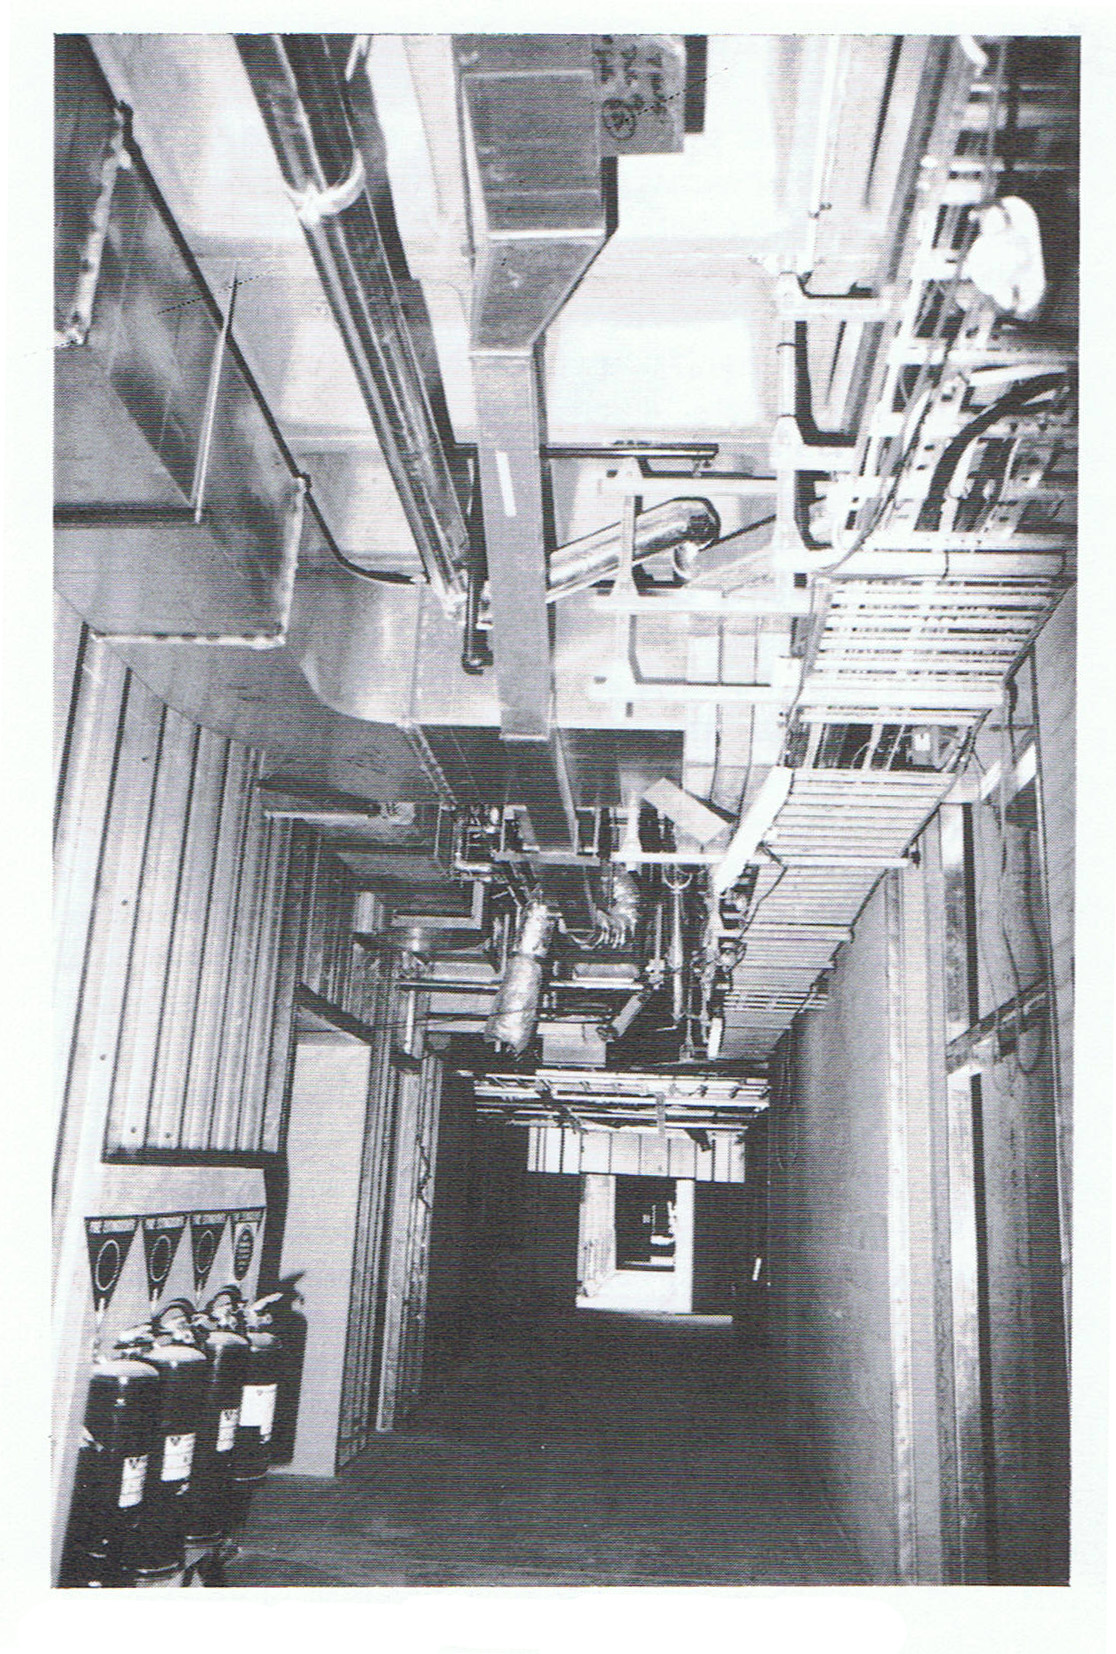 Ceiling services in a first-floor corridor